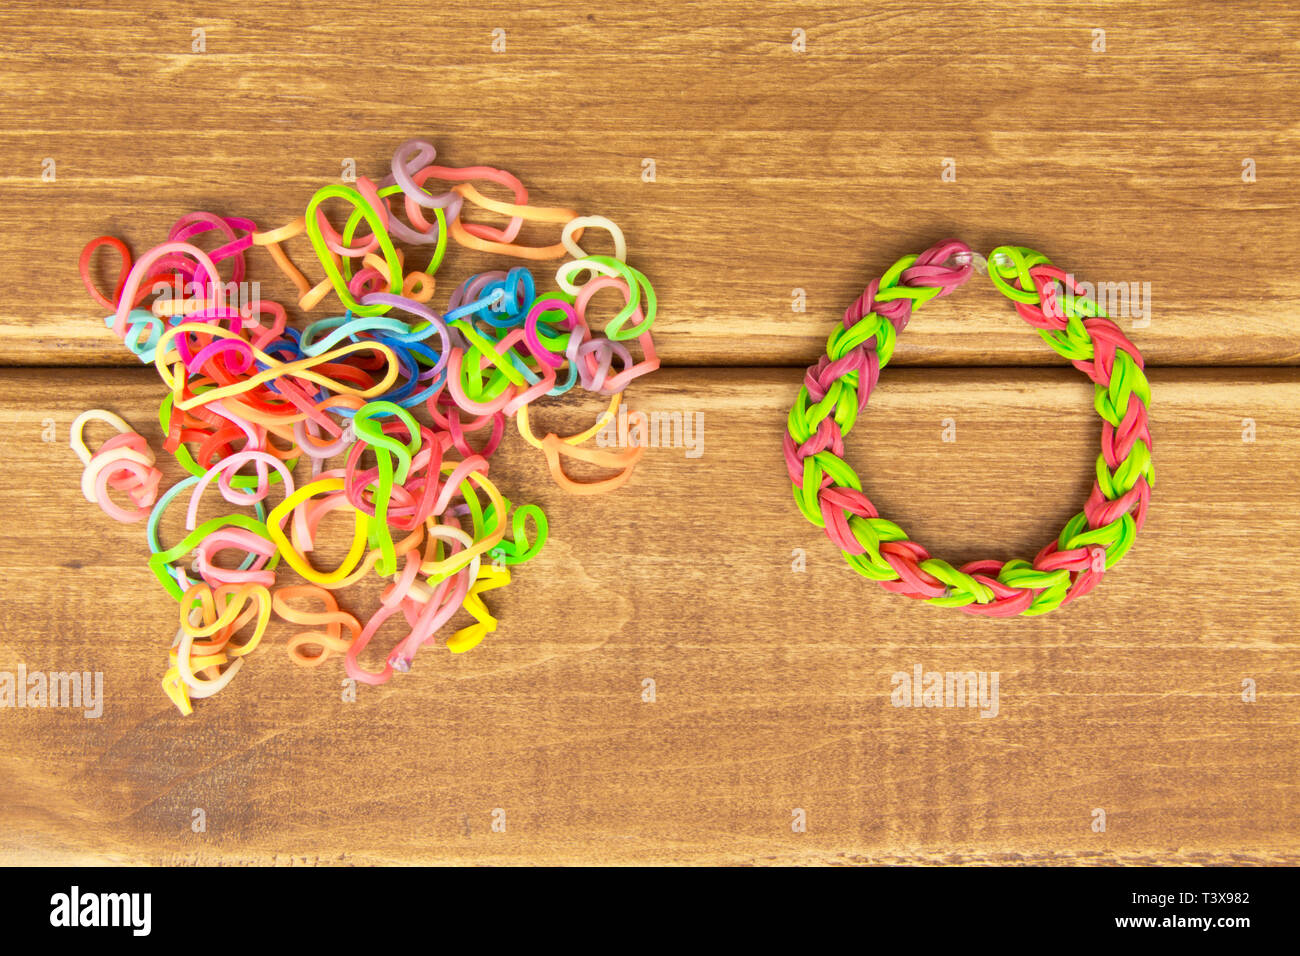 Chaos and order. Rubber bands for weaving loose and bracelet of rubber bands Stock Photo